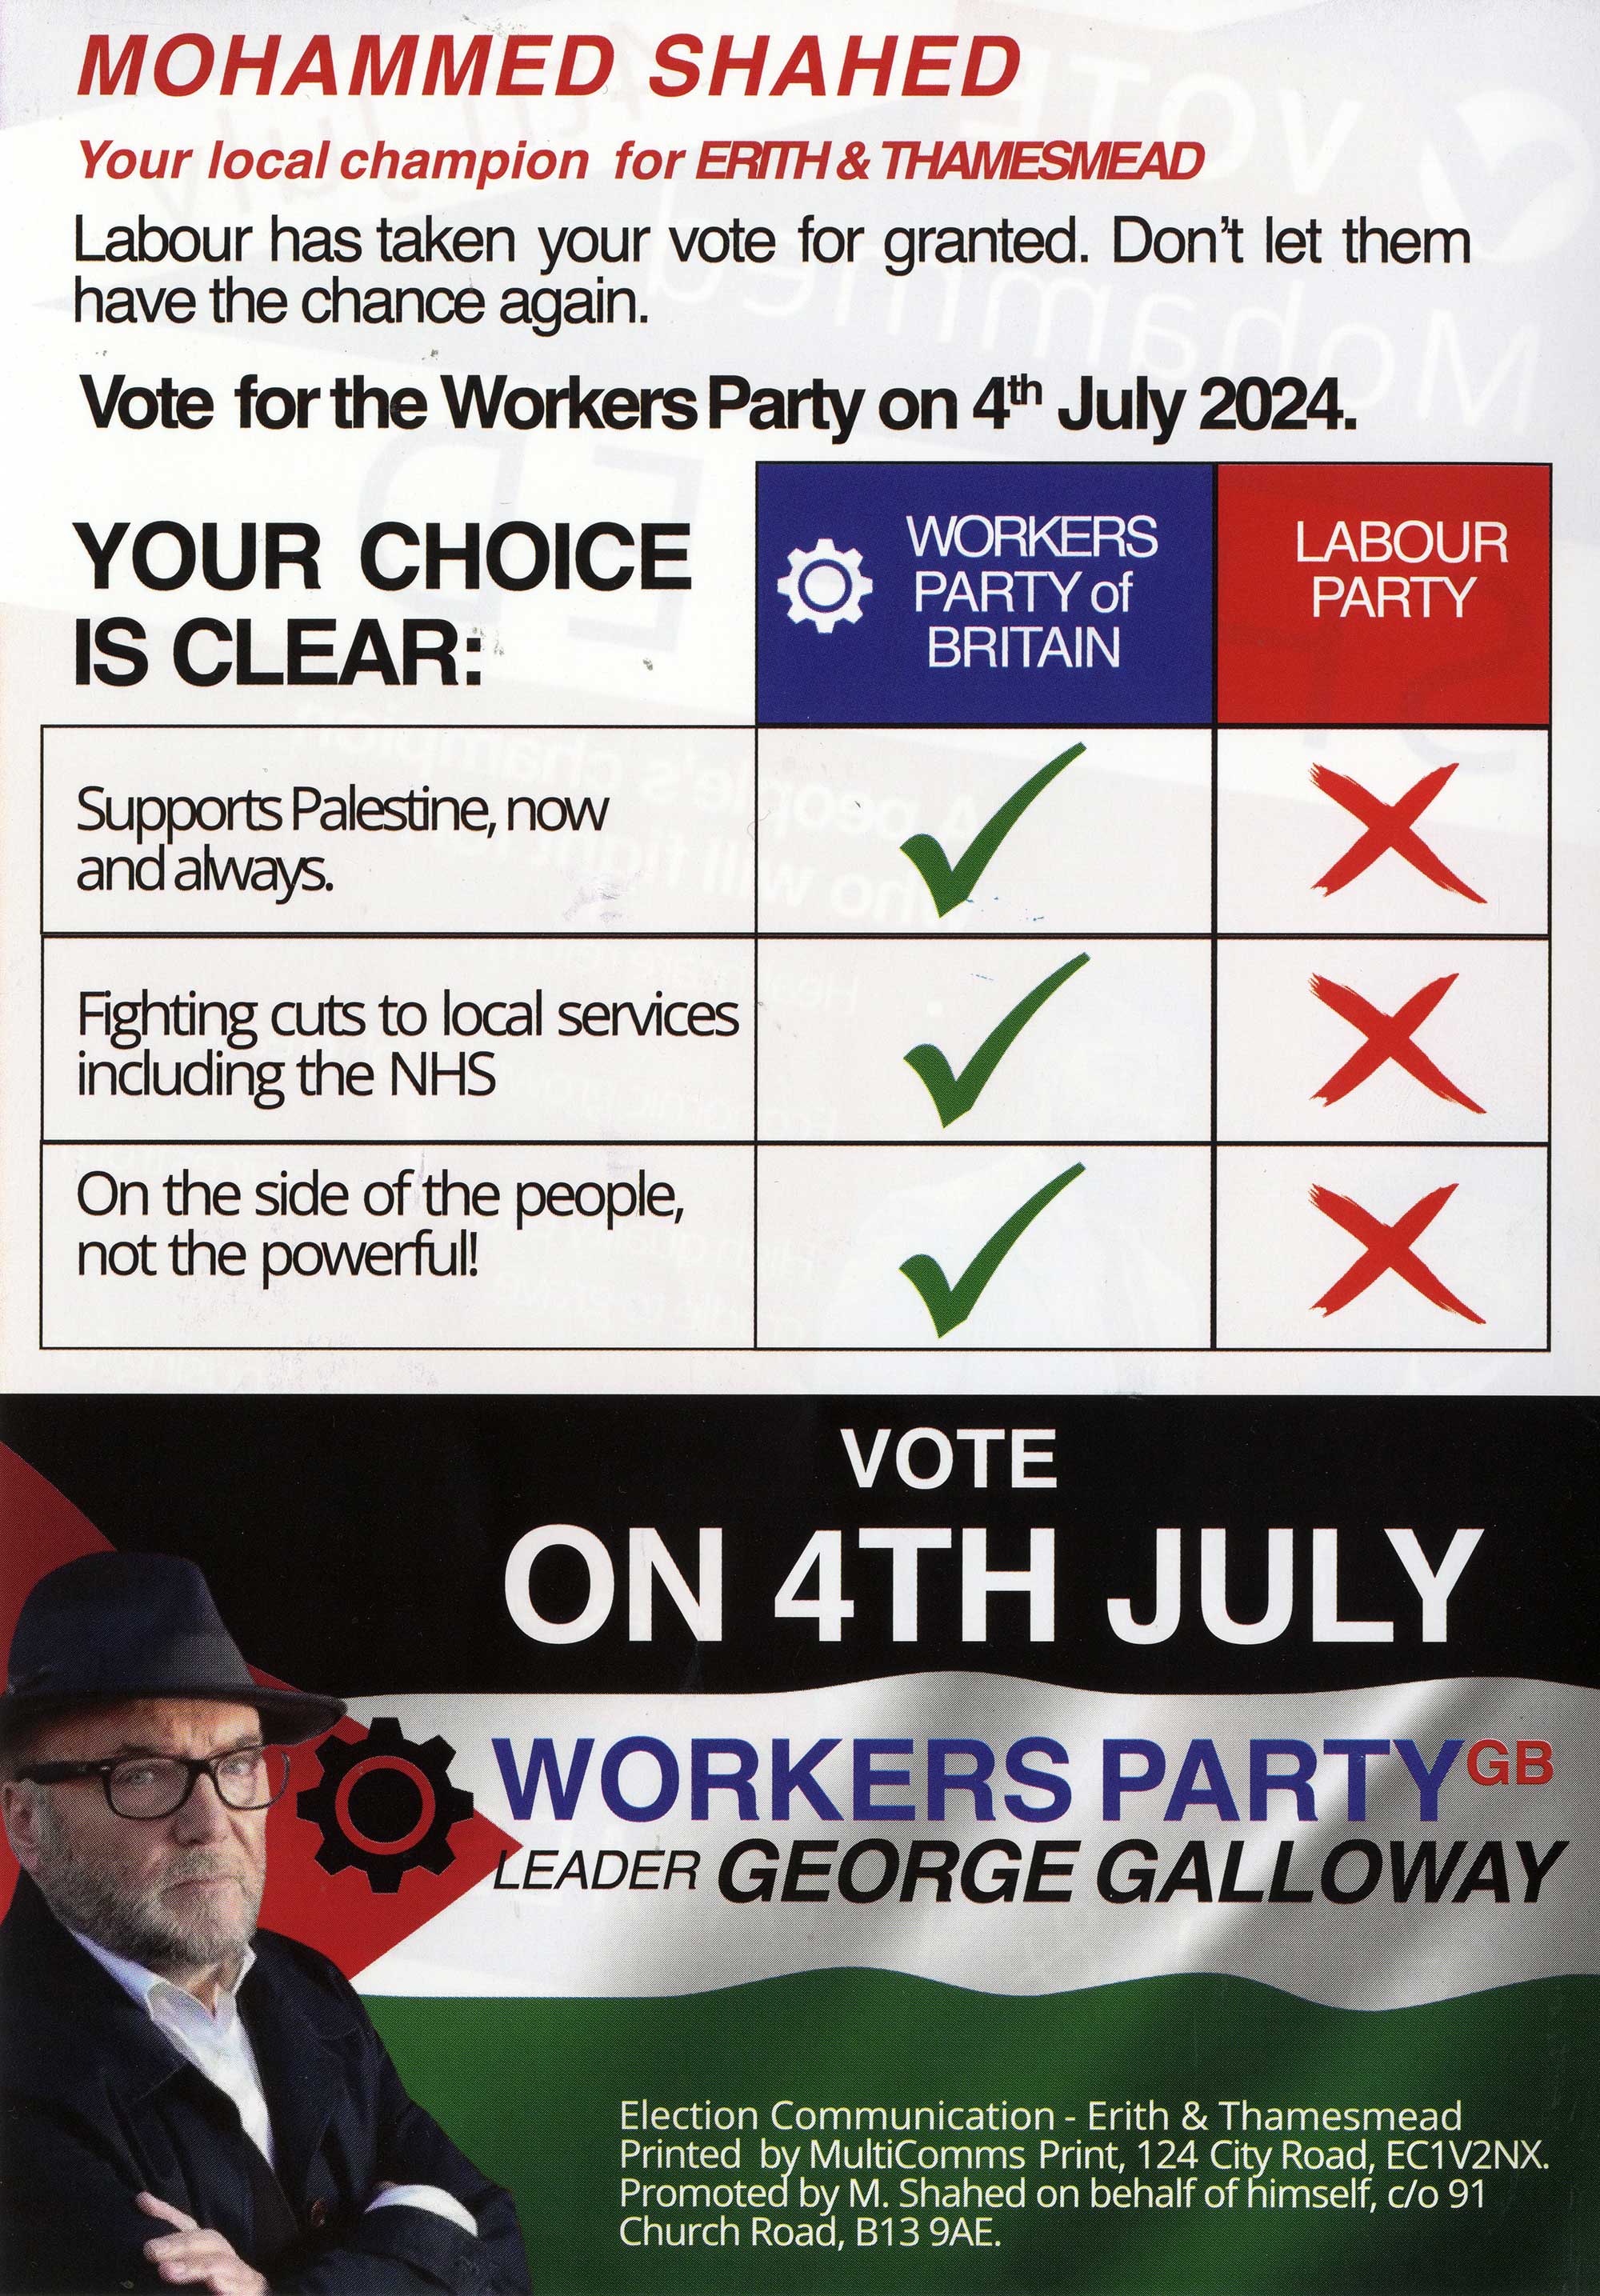 Workers Party